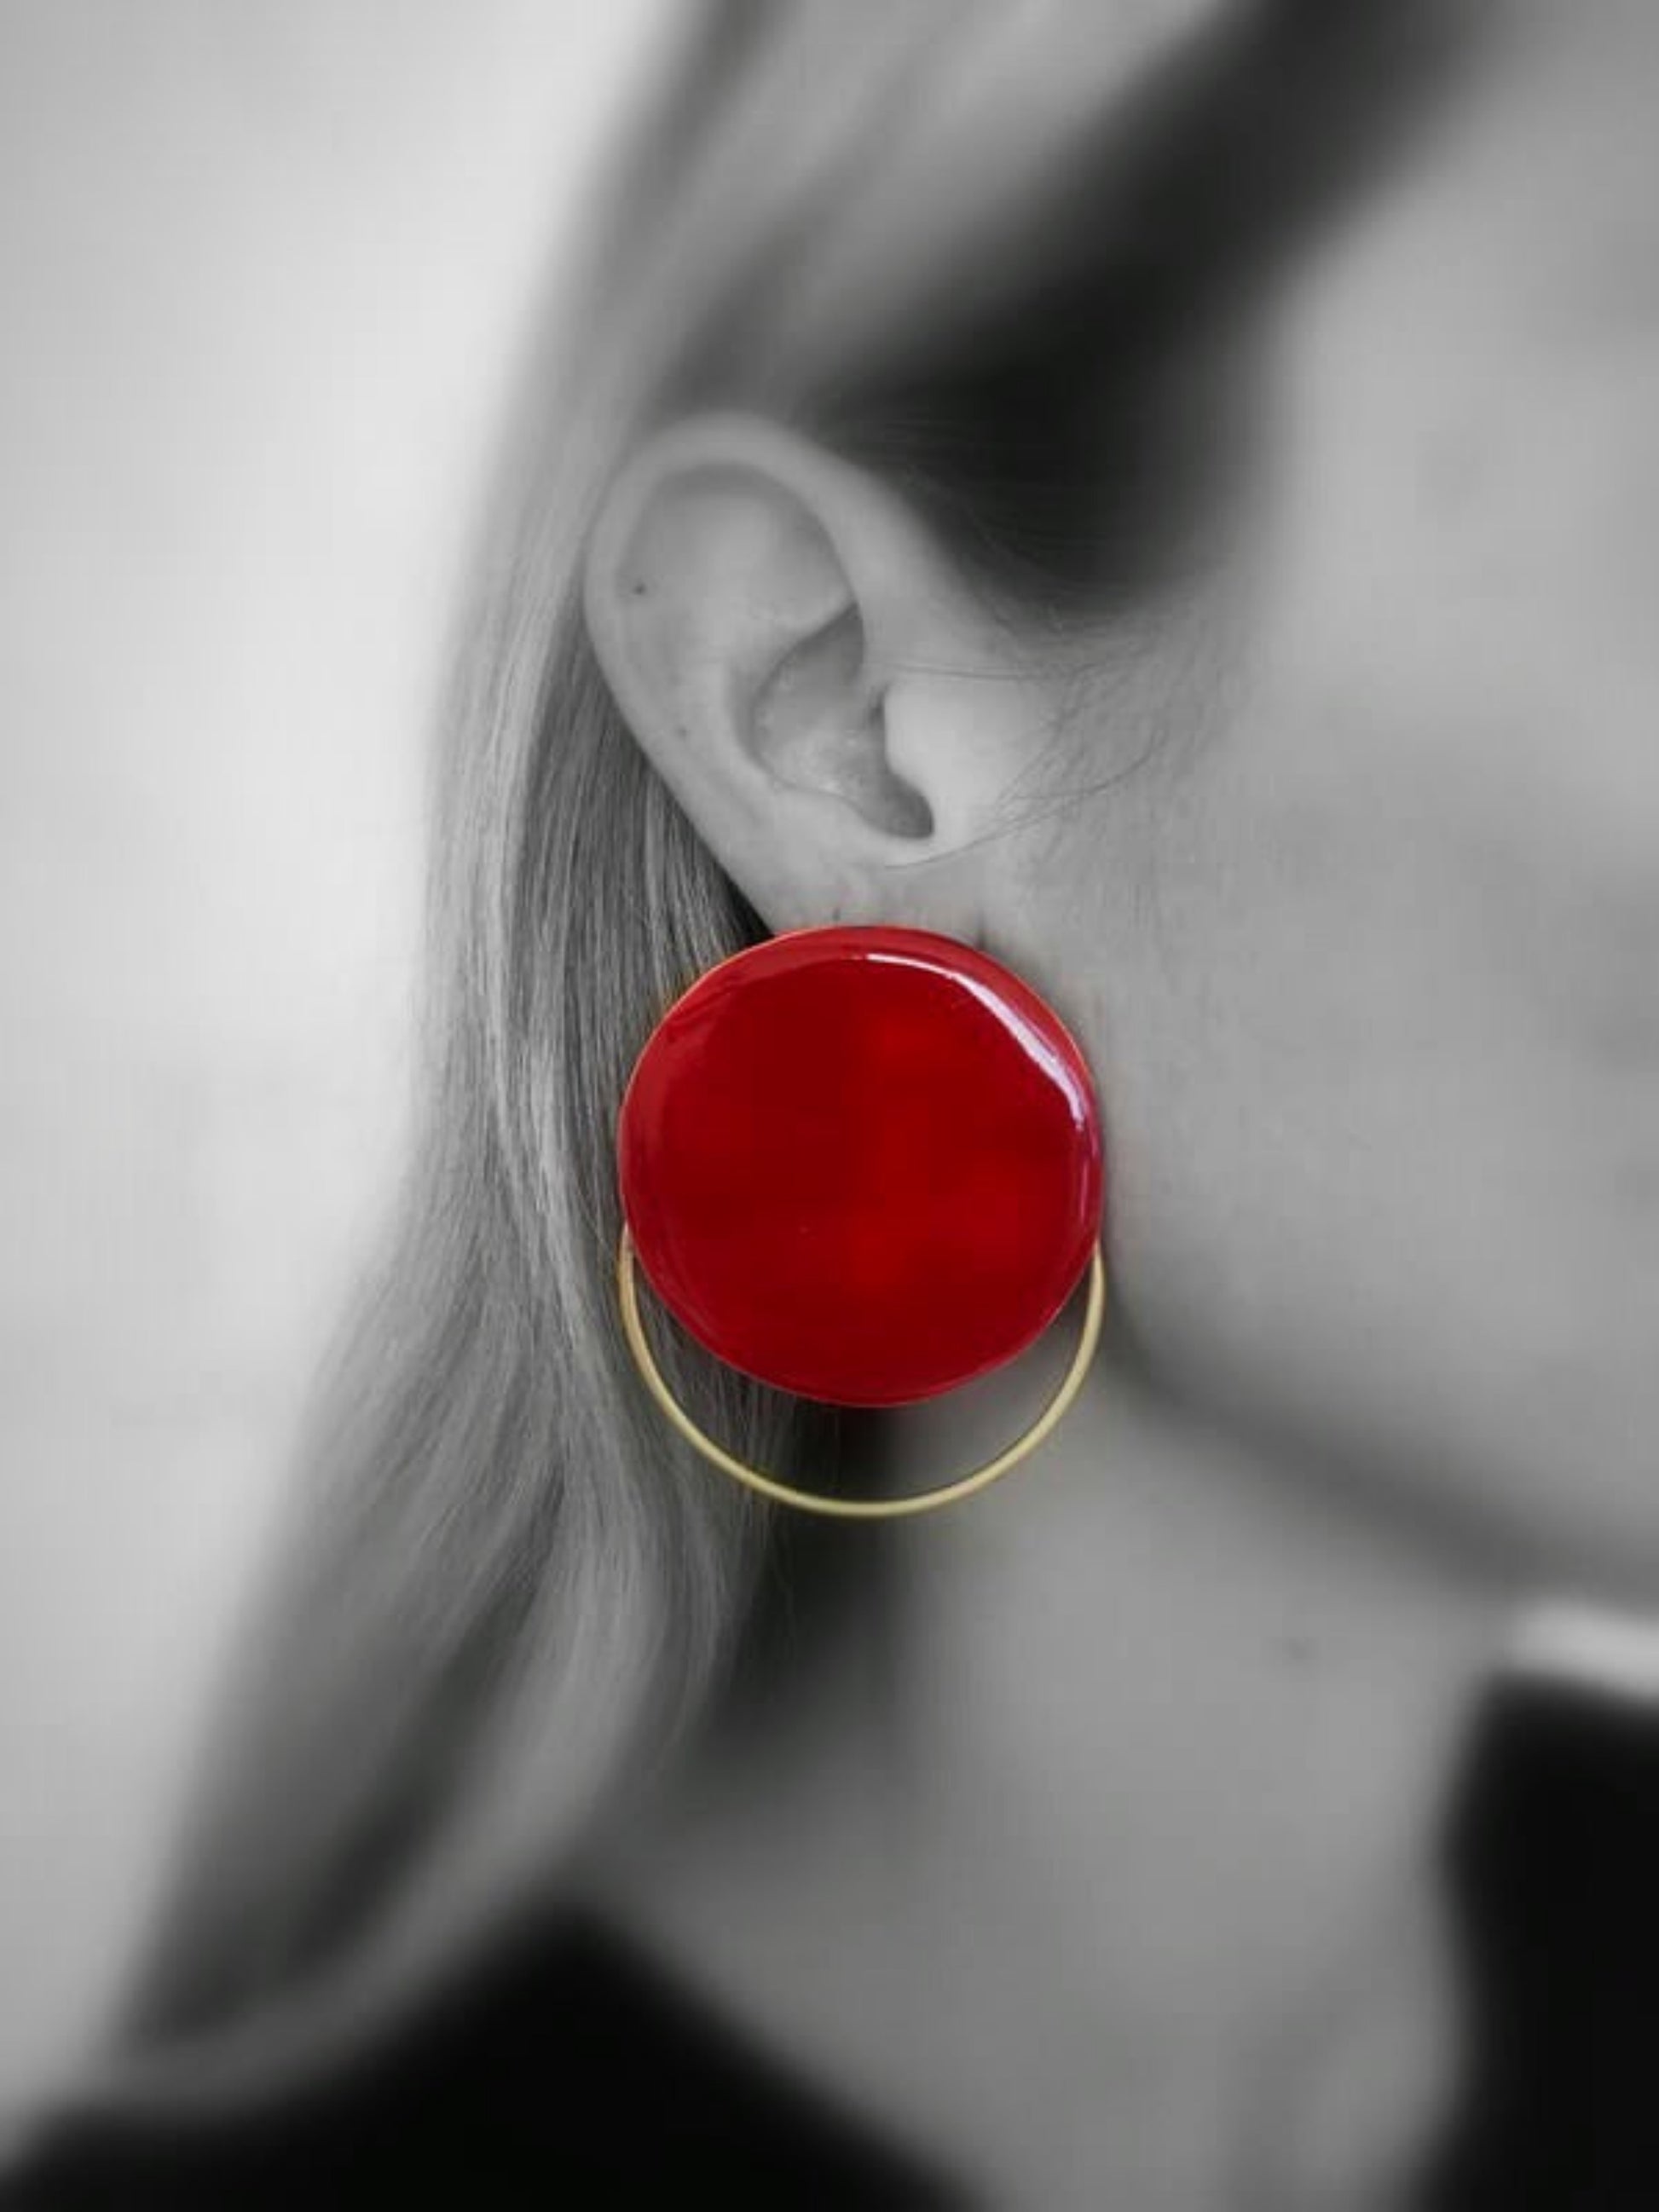 Brass earrings with resin | In Circles Earrings - CURIUDO